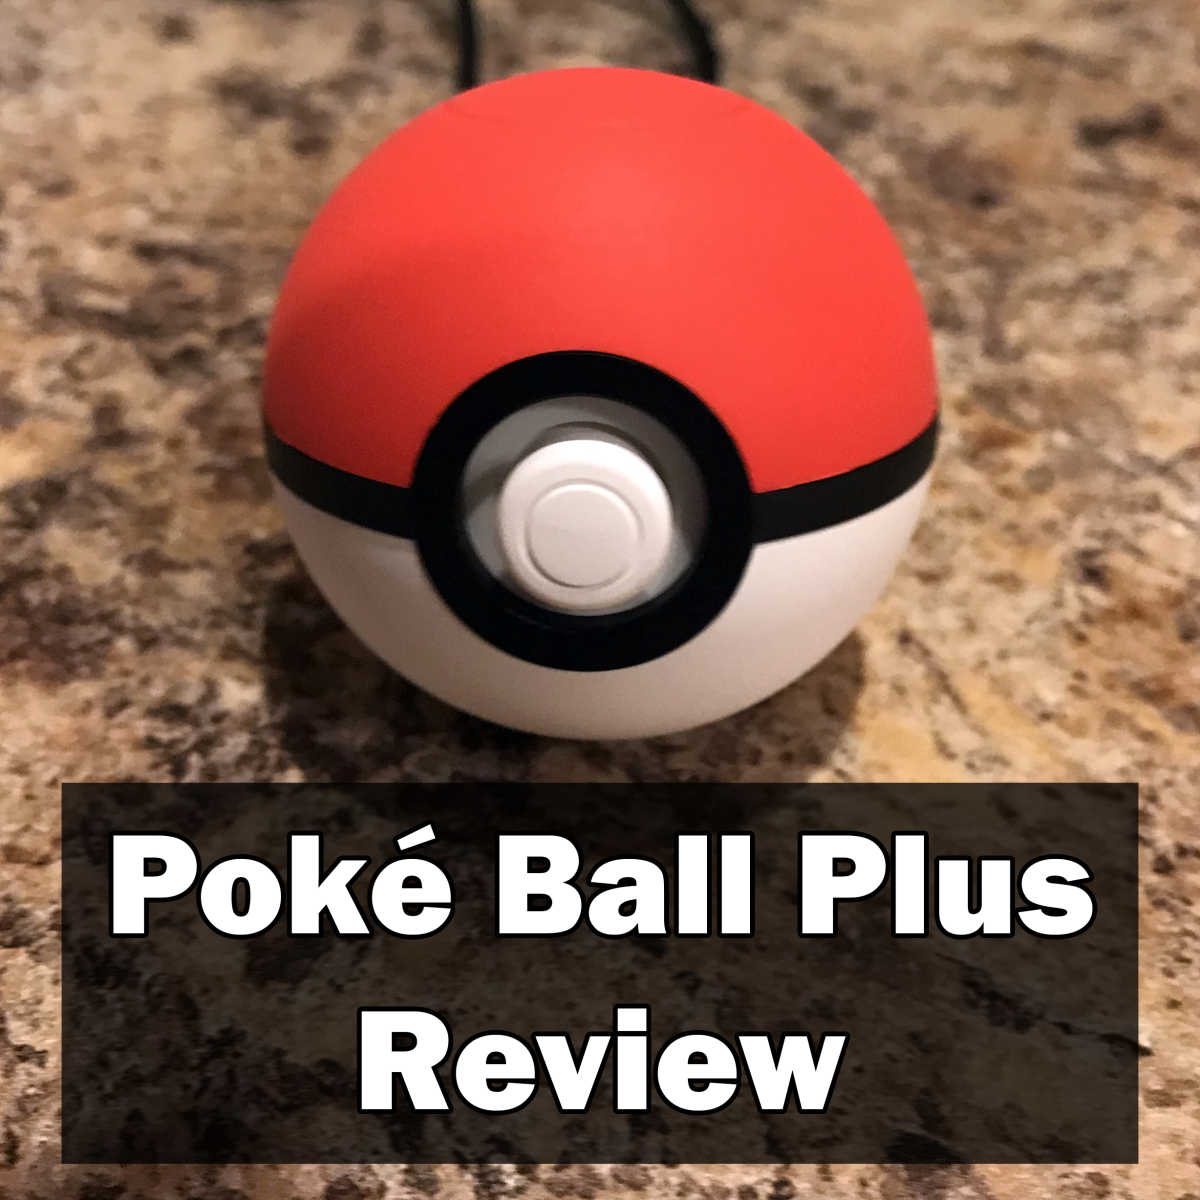 My review of the Poke Ball Plus controller for Nintendo Switch.